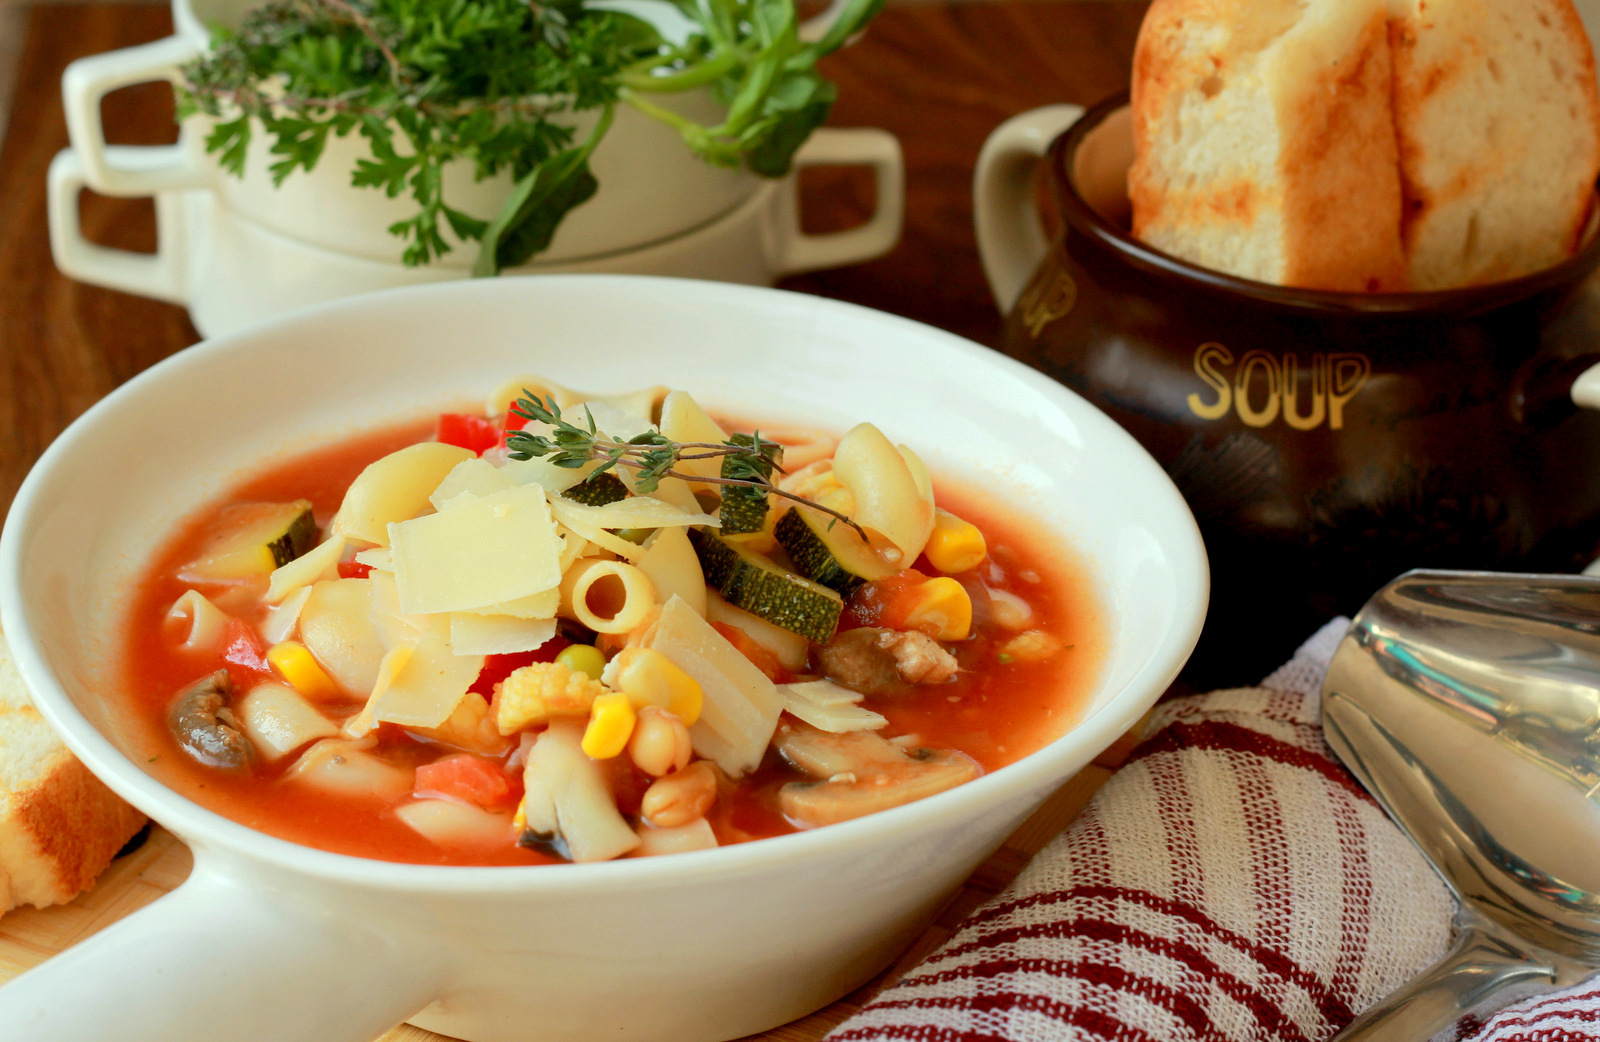 Macaroni Minestrone Soup Pot Recipe (Wholesome Italian Soup Made Using Vegetables, Beans And Macaroni)